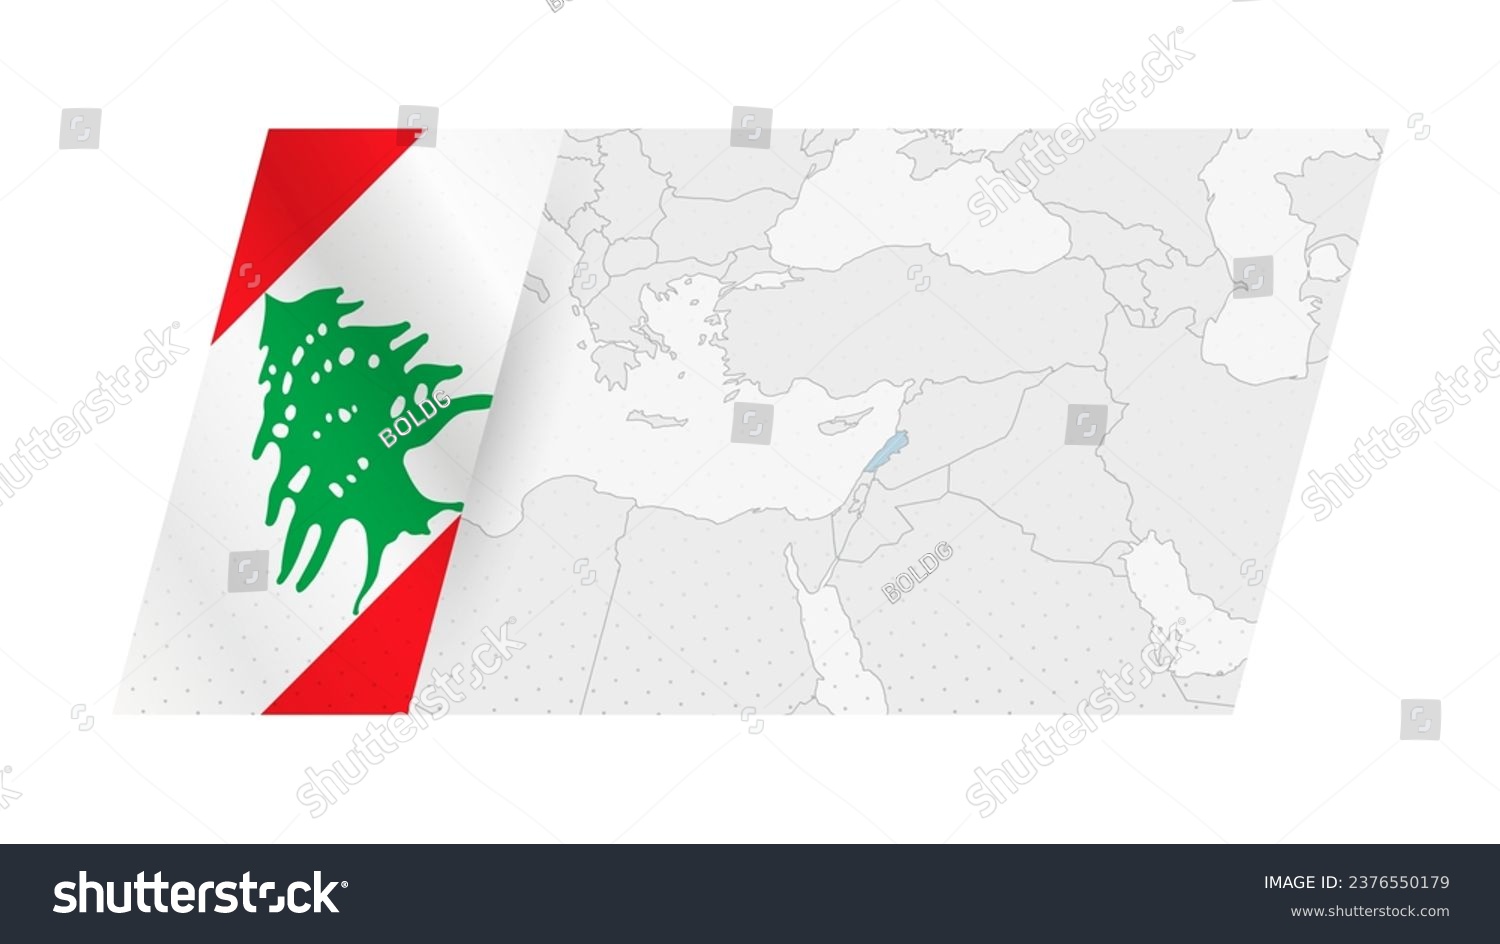 SVG of Lebanon map in modern style with flag of Lebanon on left side. Vector illustration of a map. svg